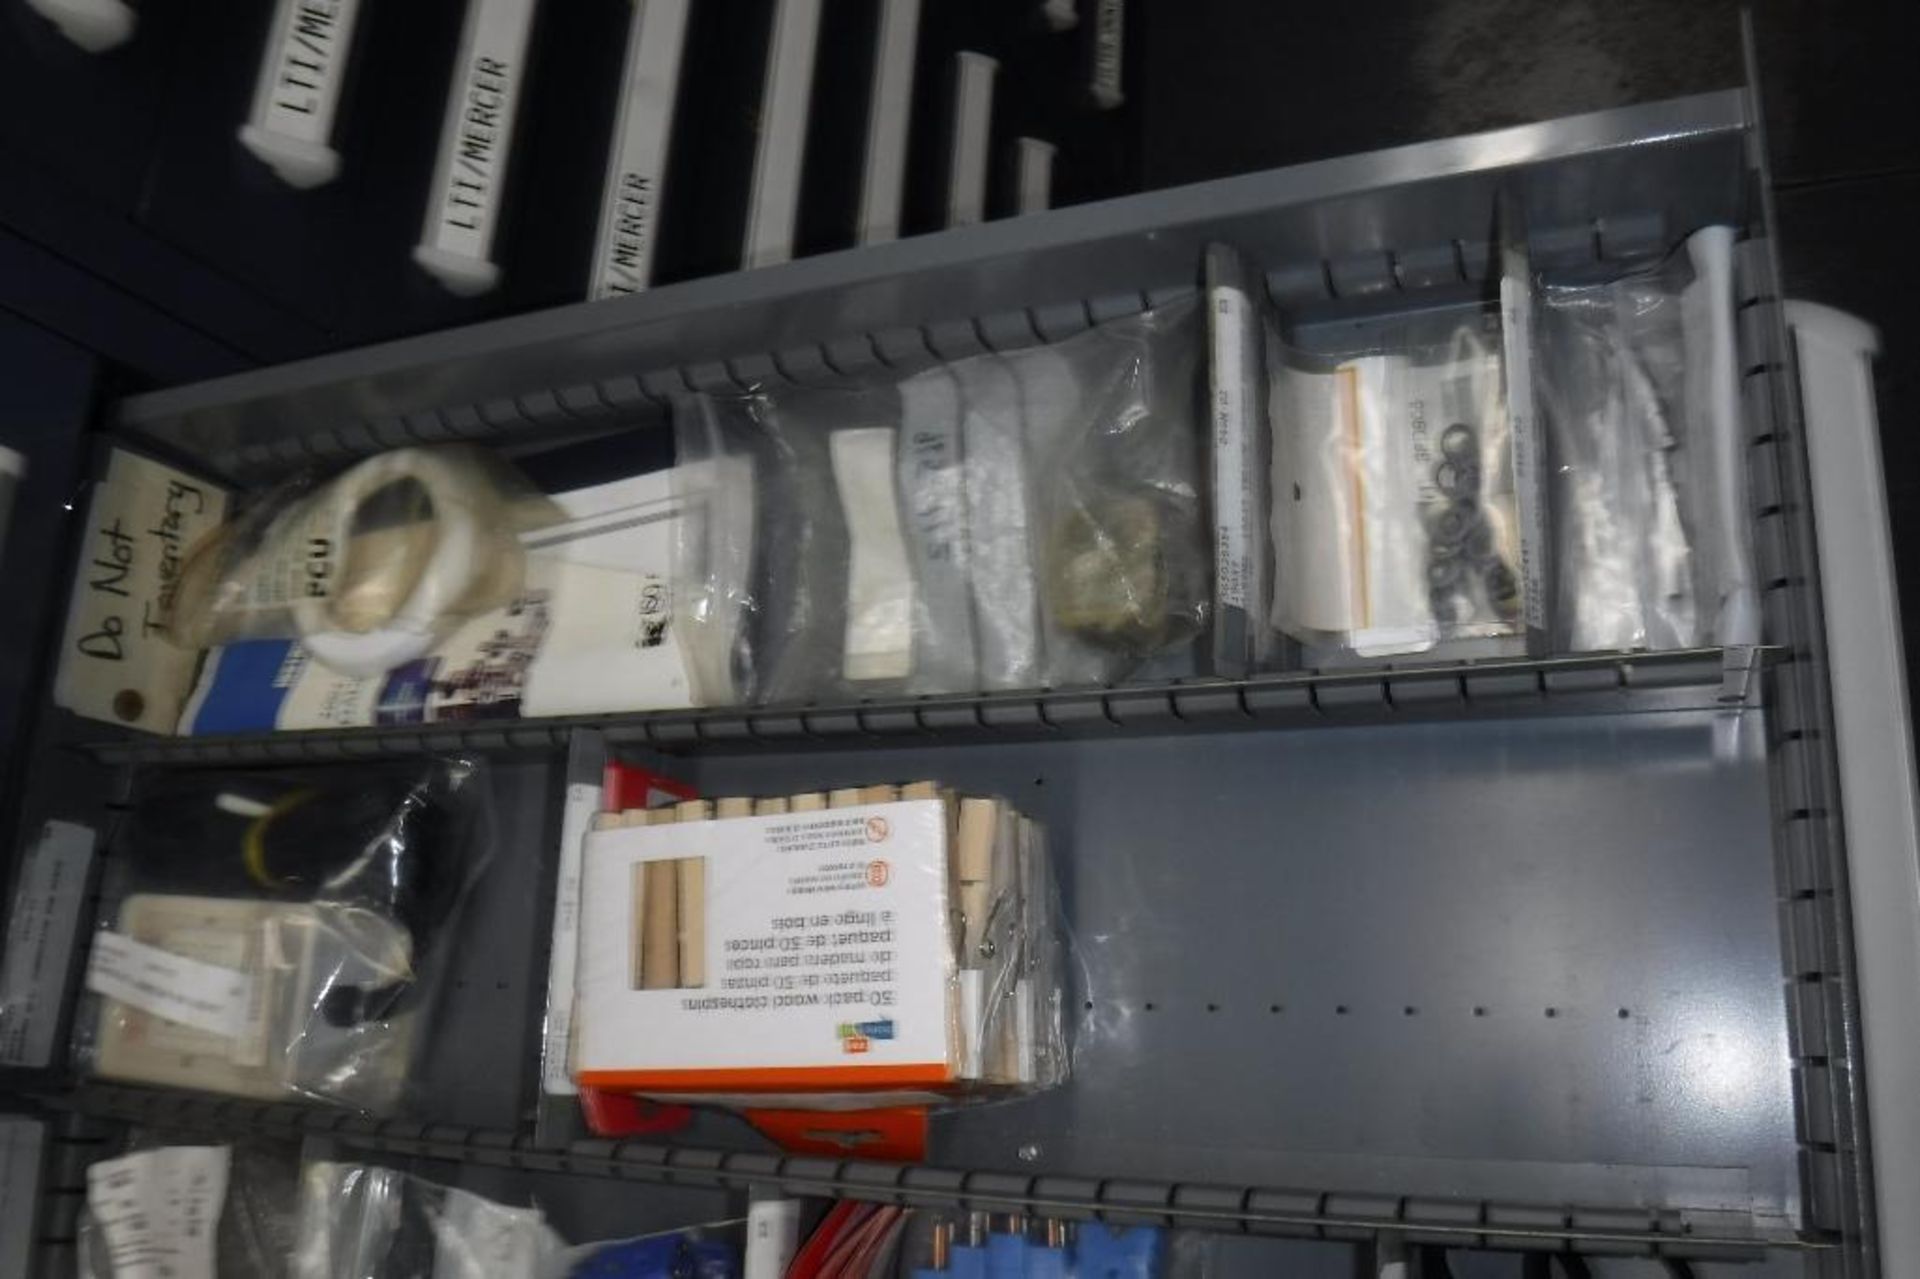 10-Drawer Vidmar Cabinet with Contents-PCU,O-Rings,Vacuum Gauge,Circle Seal Check Valves,Leak Tester - Image 13 of 15